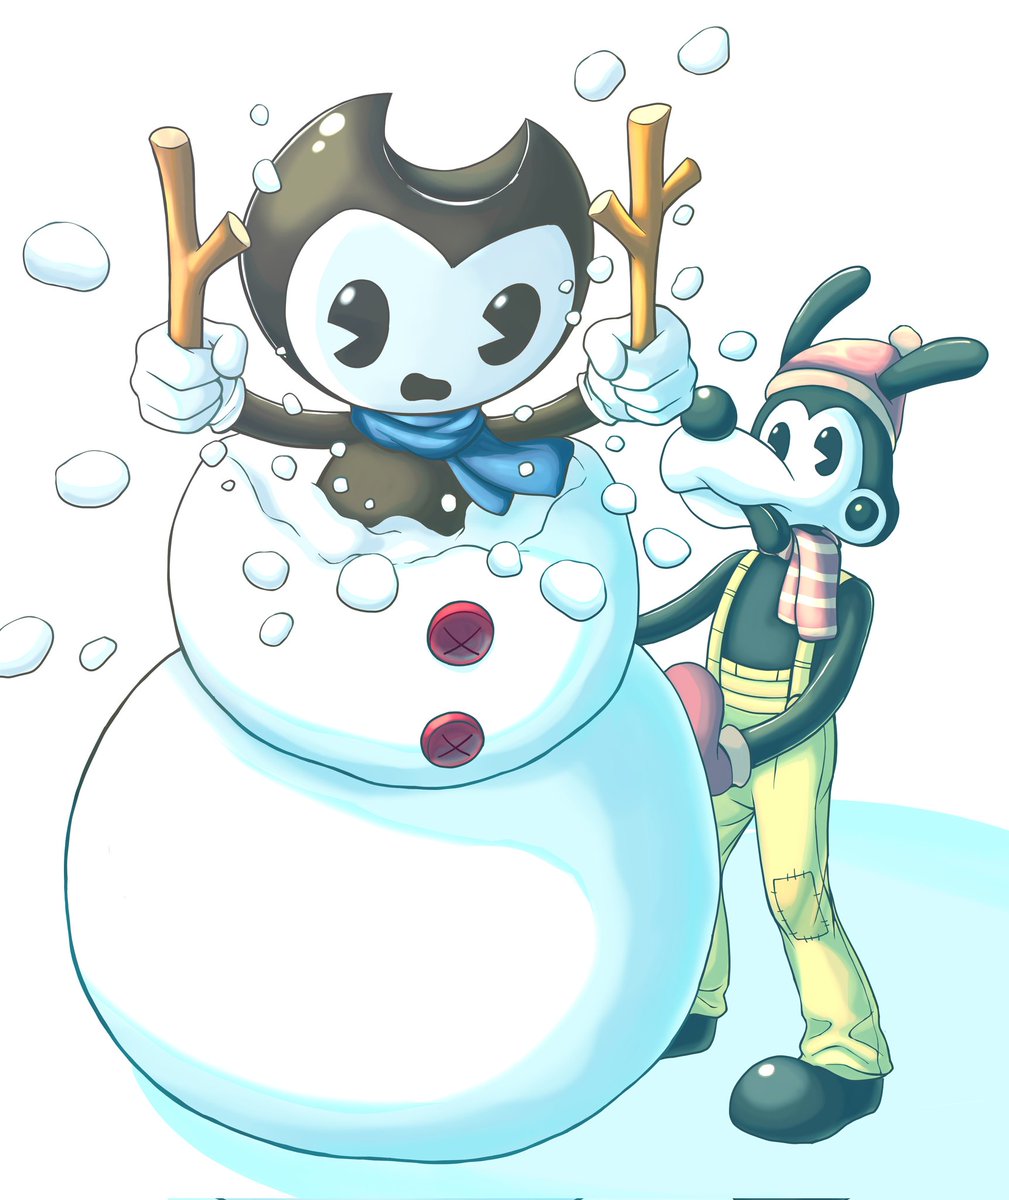 Boris Makes a Snowman
#Bendy_and_the_ink_machine
#Bendy_and_the_Dark_Revival
#JoeysArtChallenge